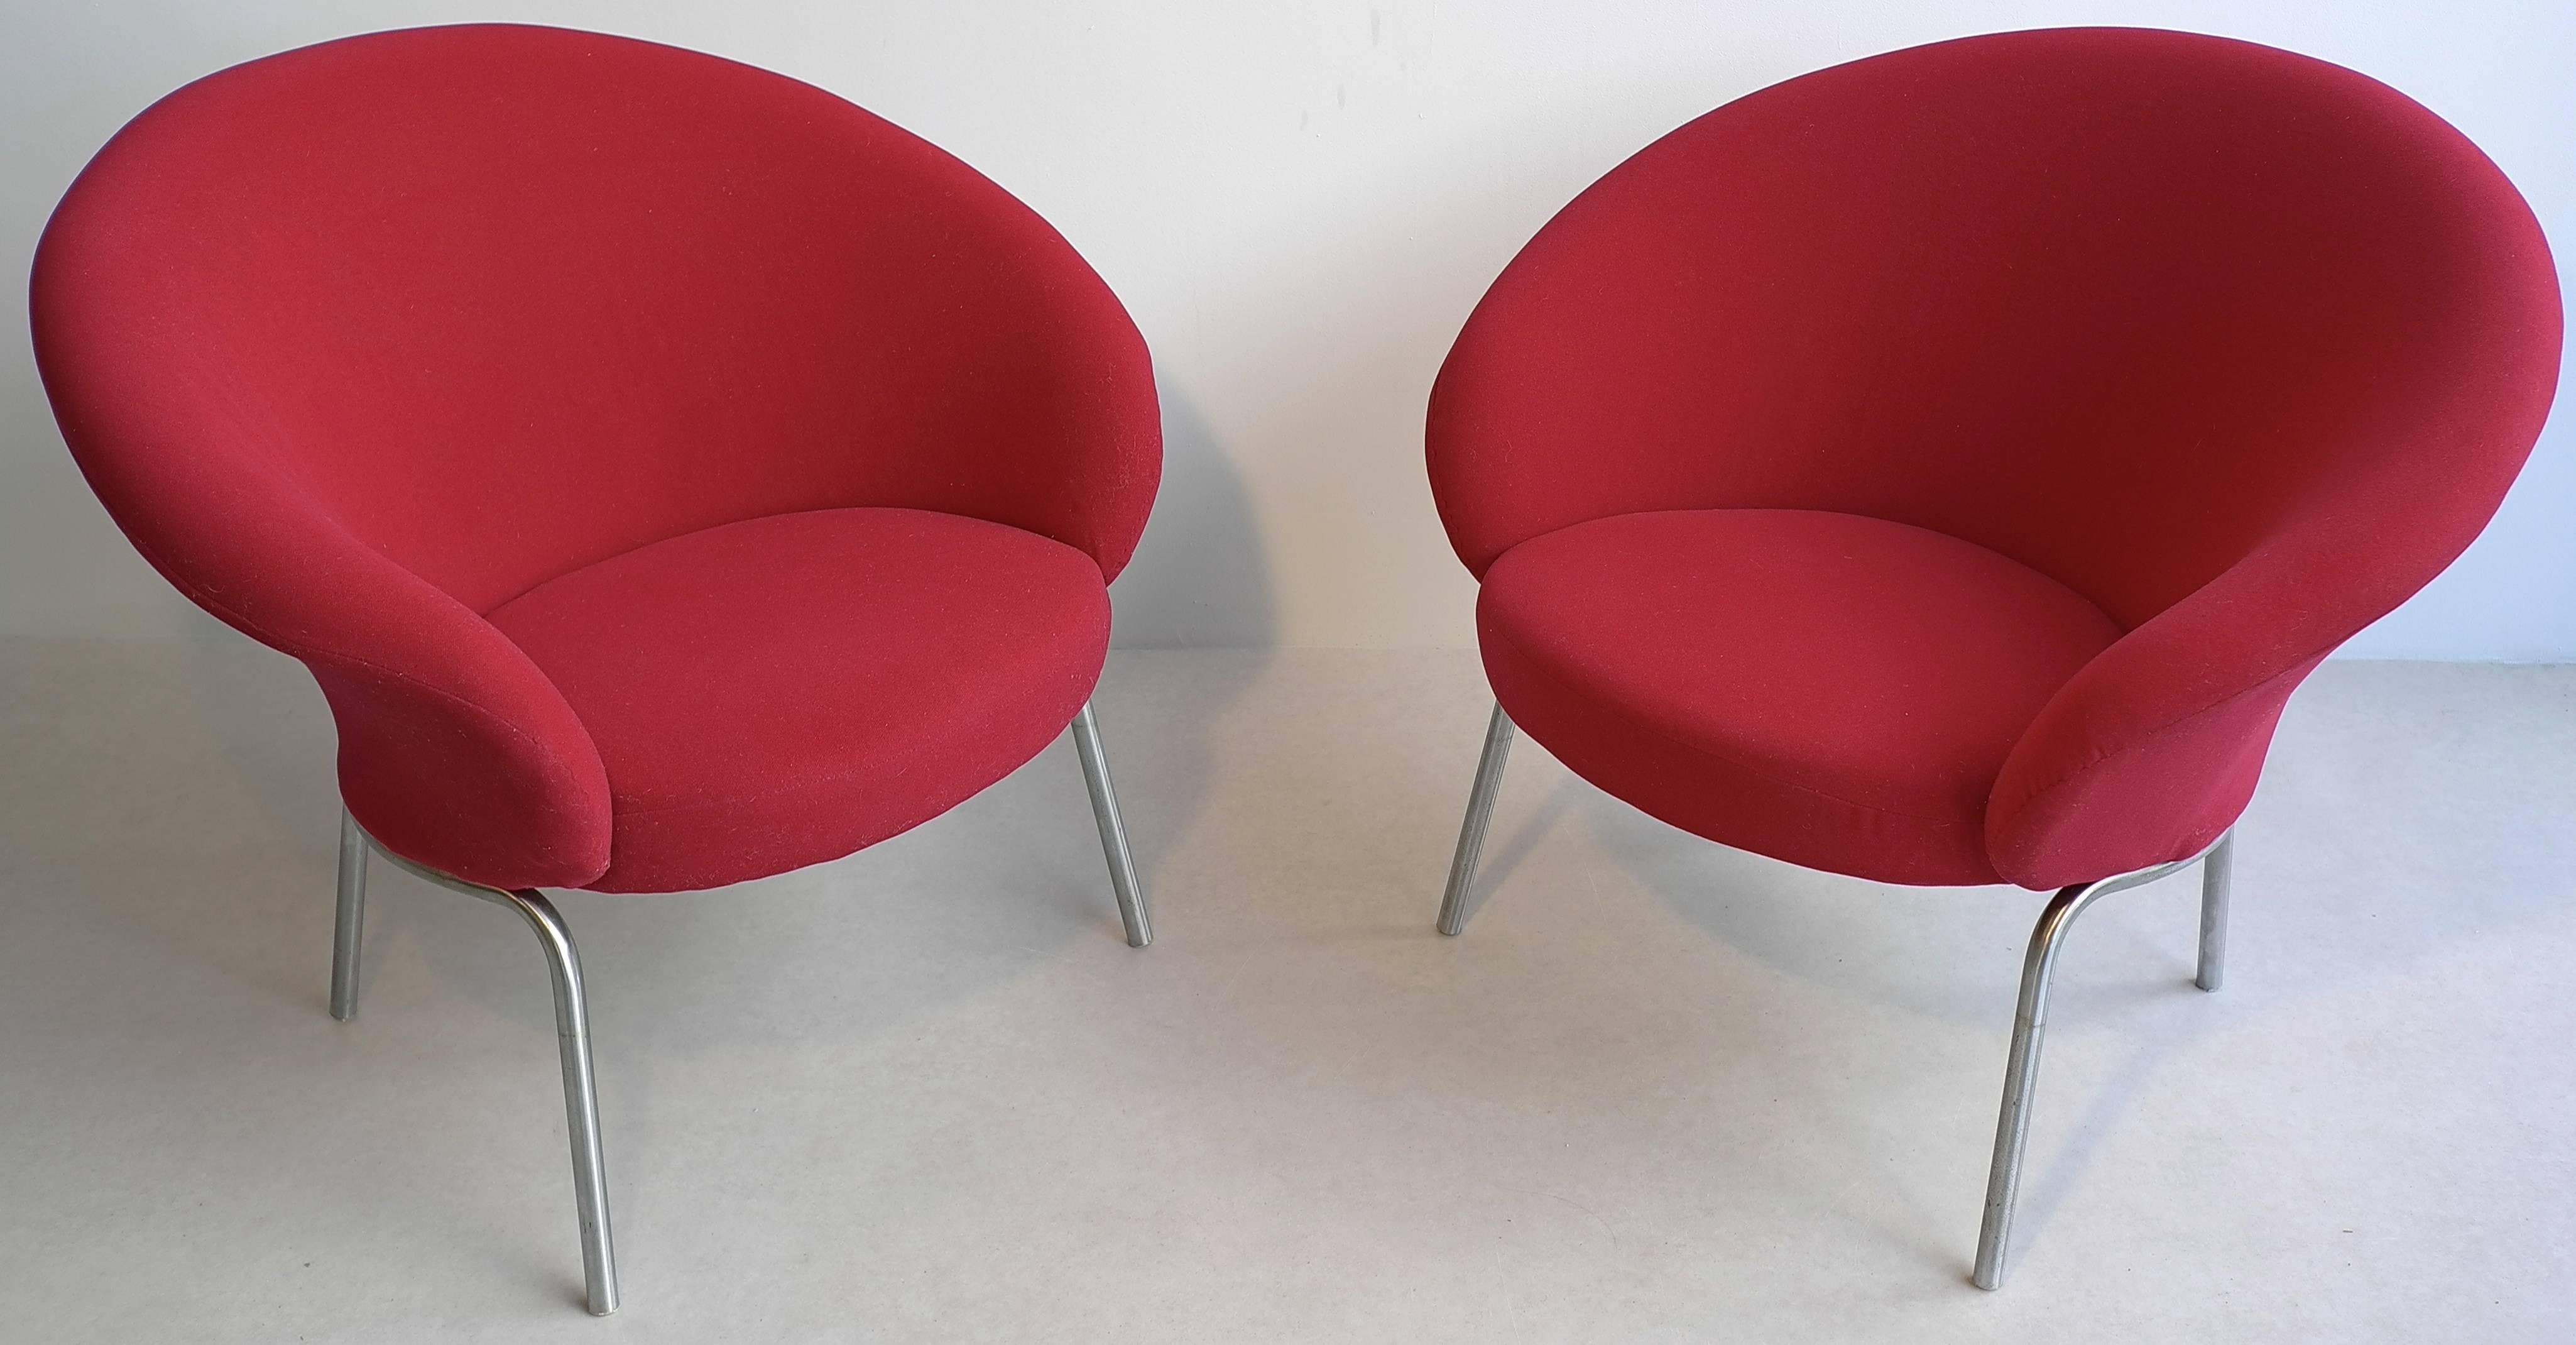 Rare Pierre Paulin 570 armchairs made by Artifort 1963.
These where only produced a short period by Artifort. They have almost the same shape as a Mushroom but then with 4 legs.
